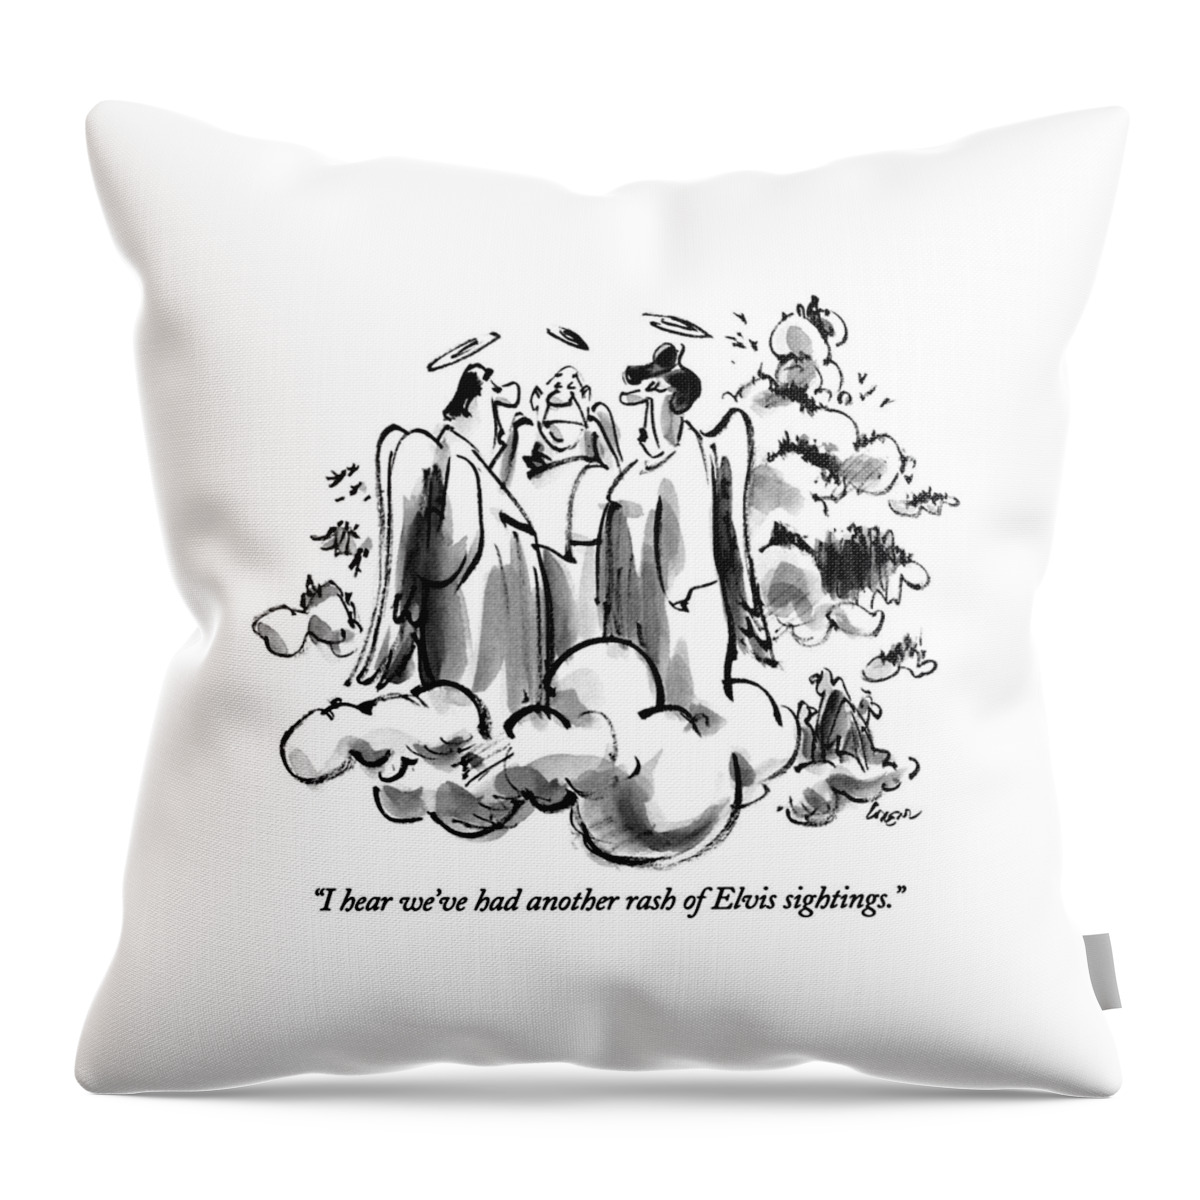 I Hear We've Had Another Rash Of Elvis Sightings Throw Pillow